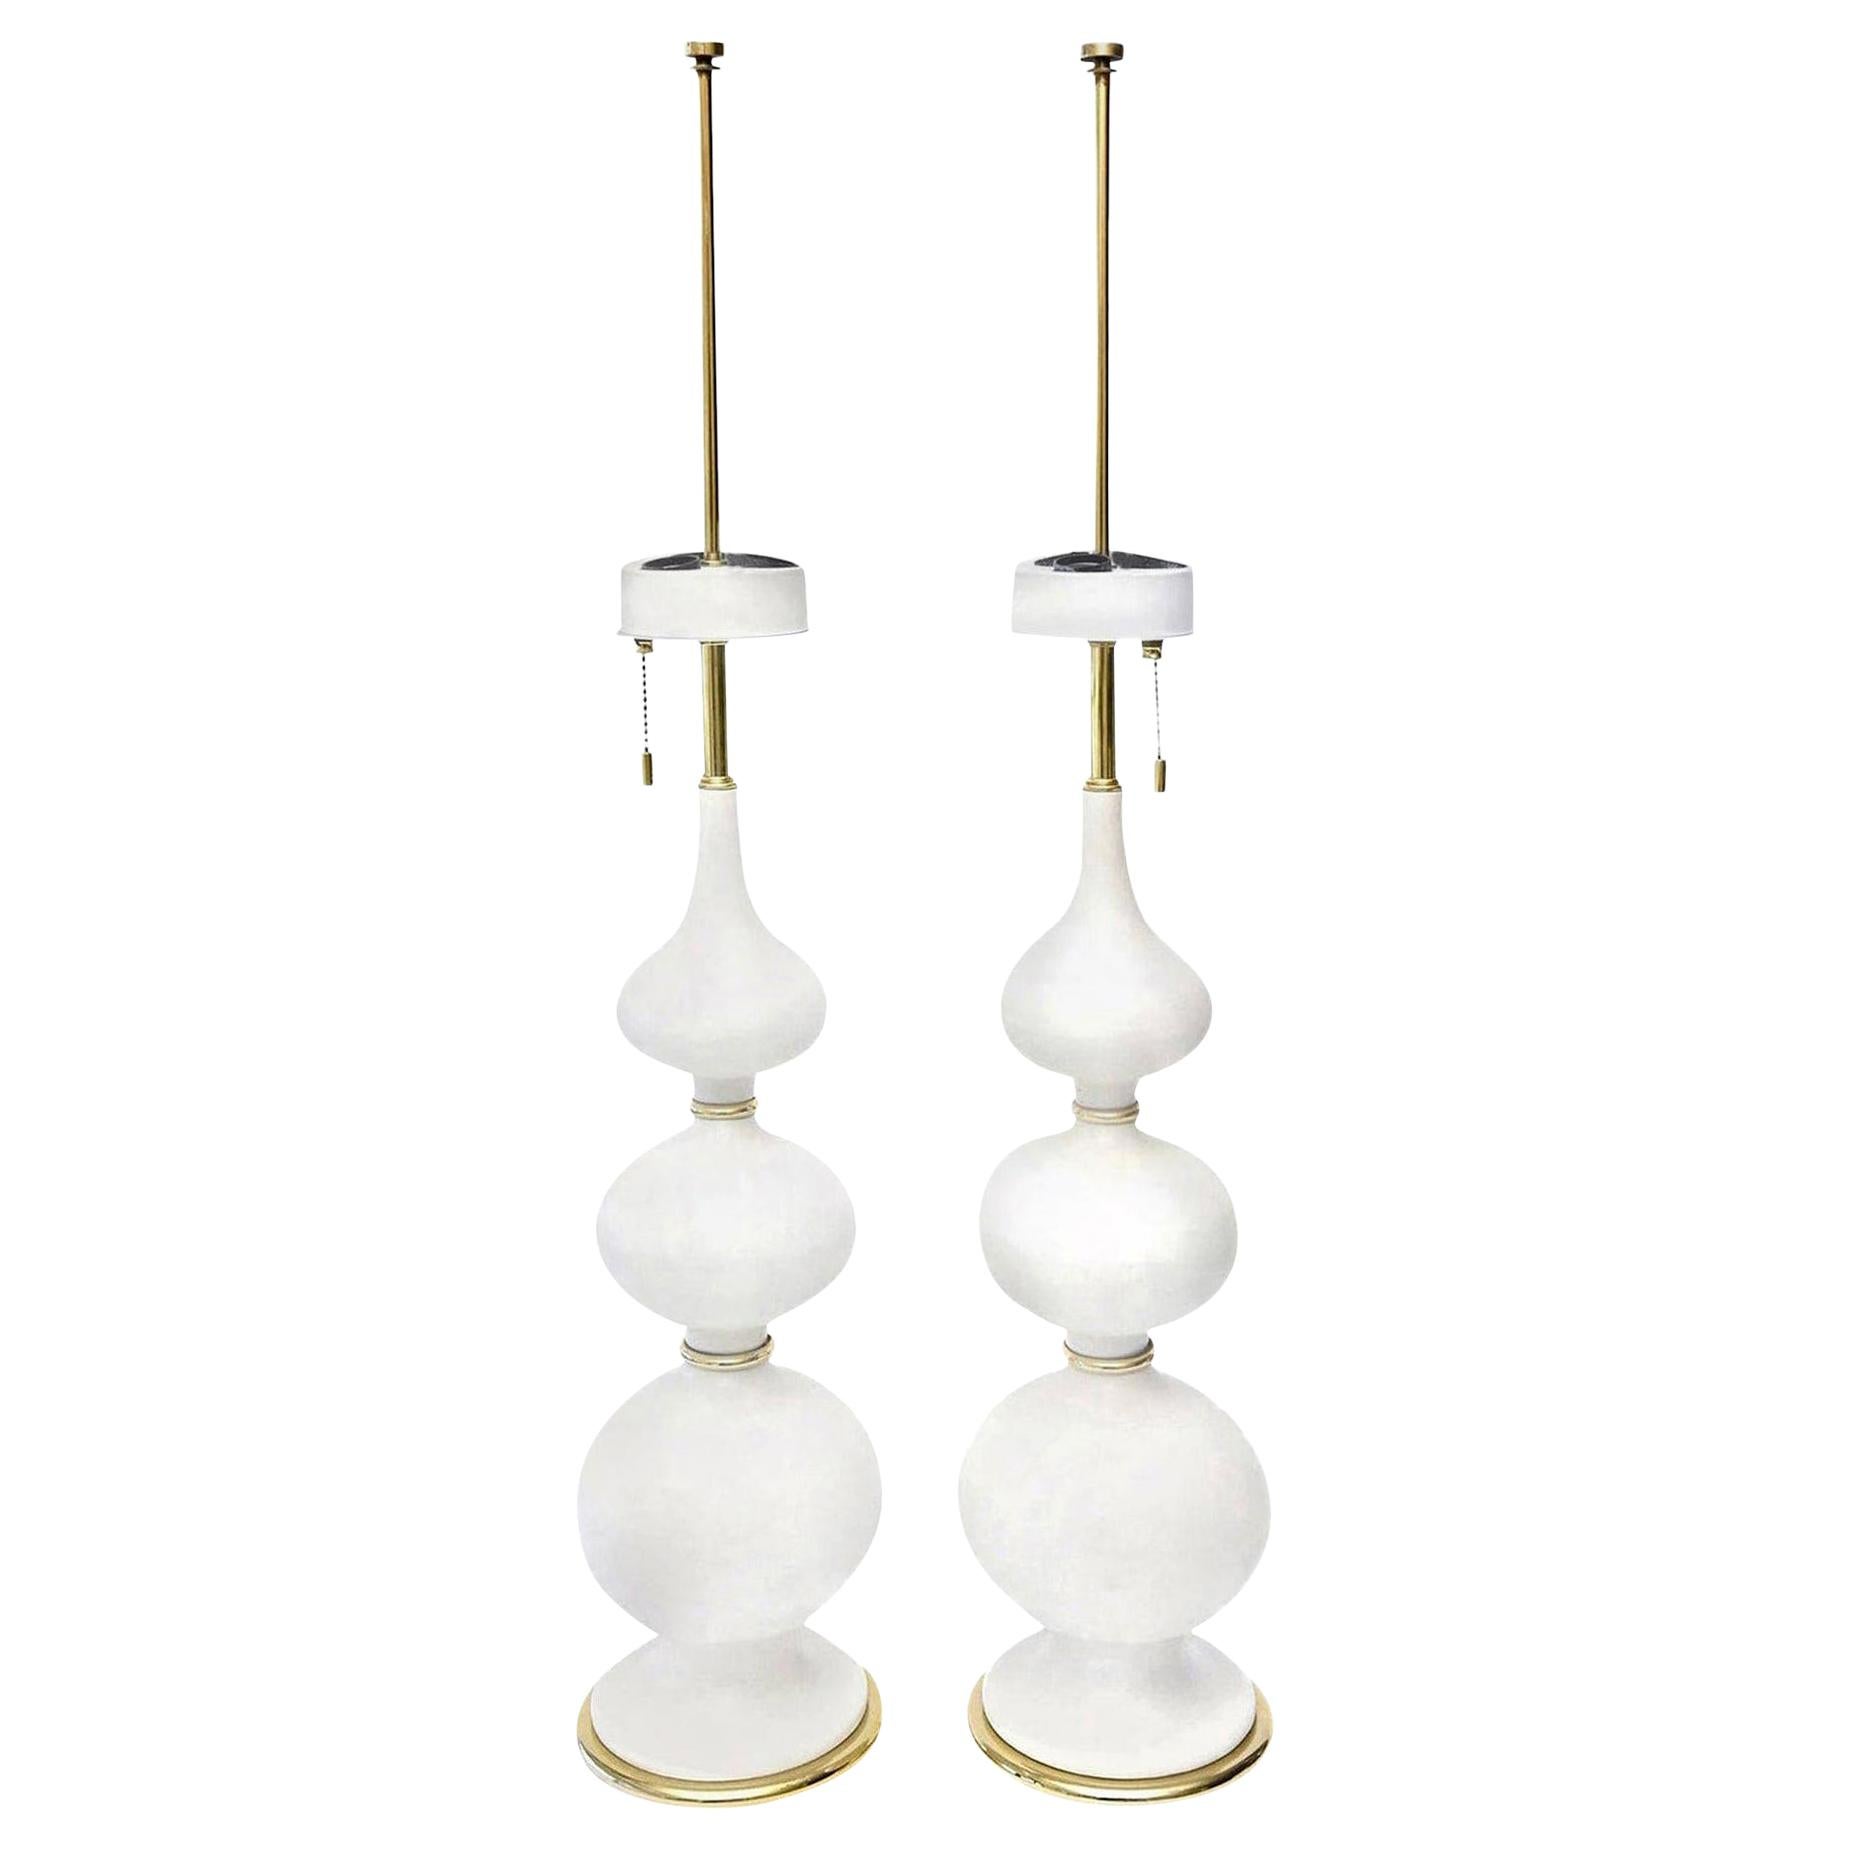  Gerald Thurston White Ceramic and Brass Lamps Mid-Century Modern Pair Of